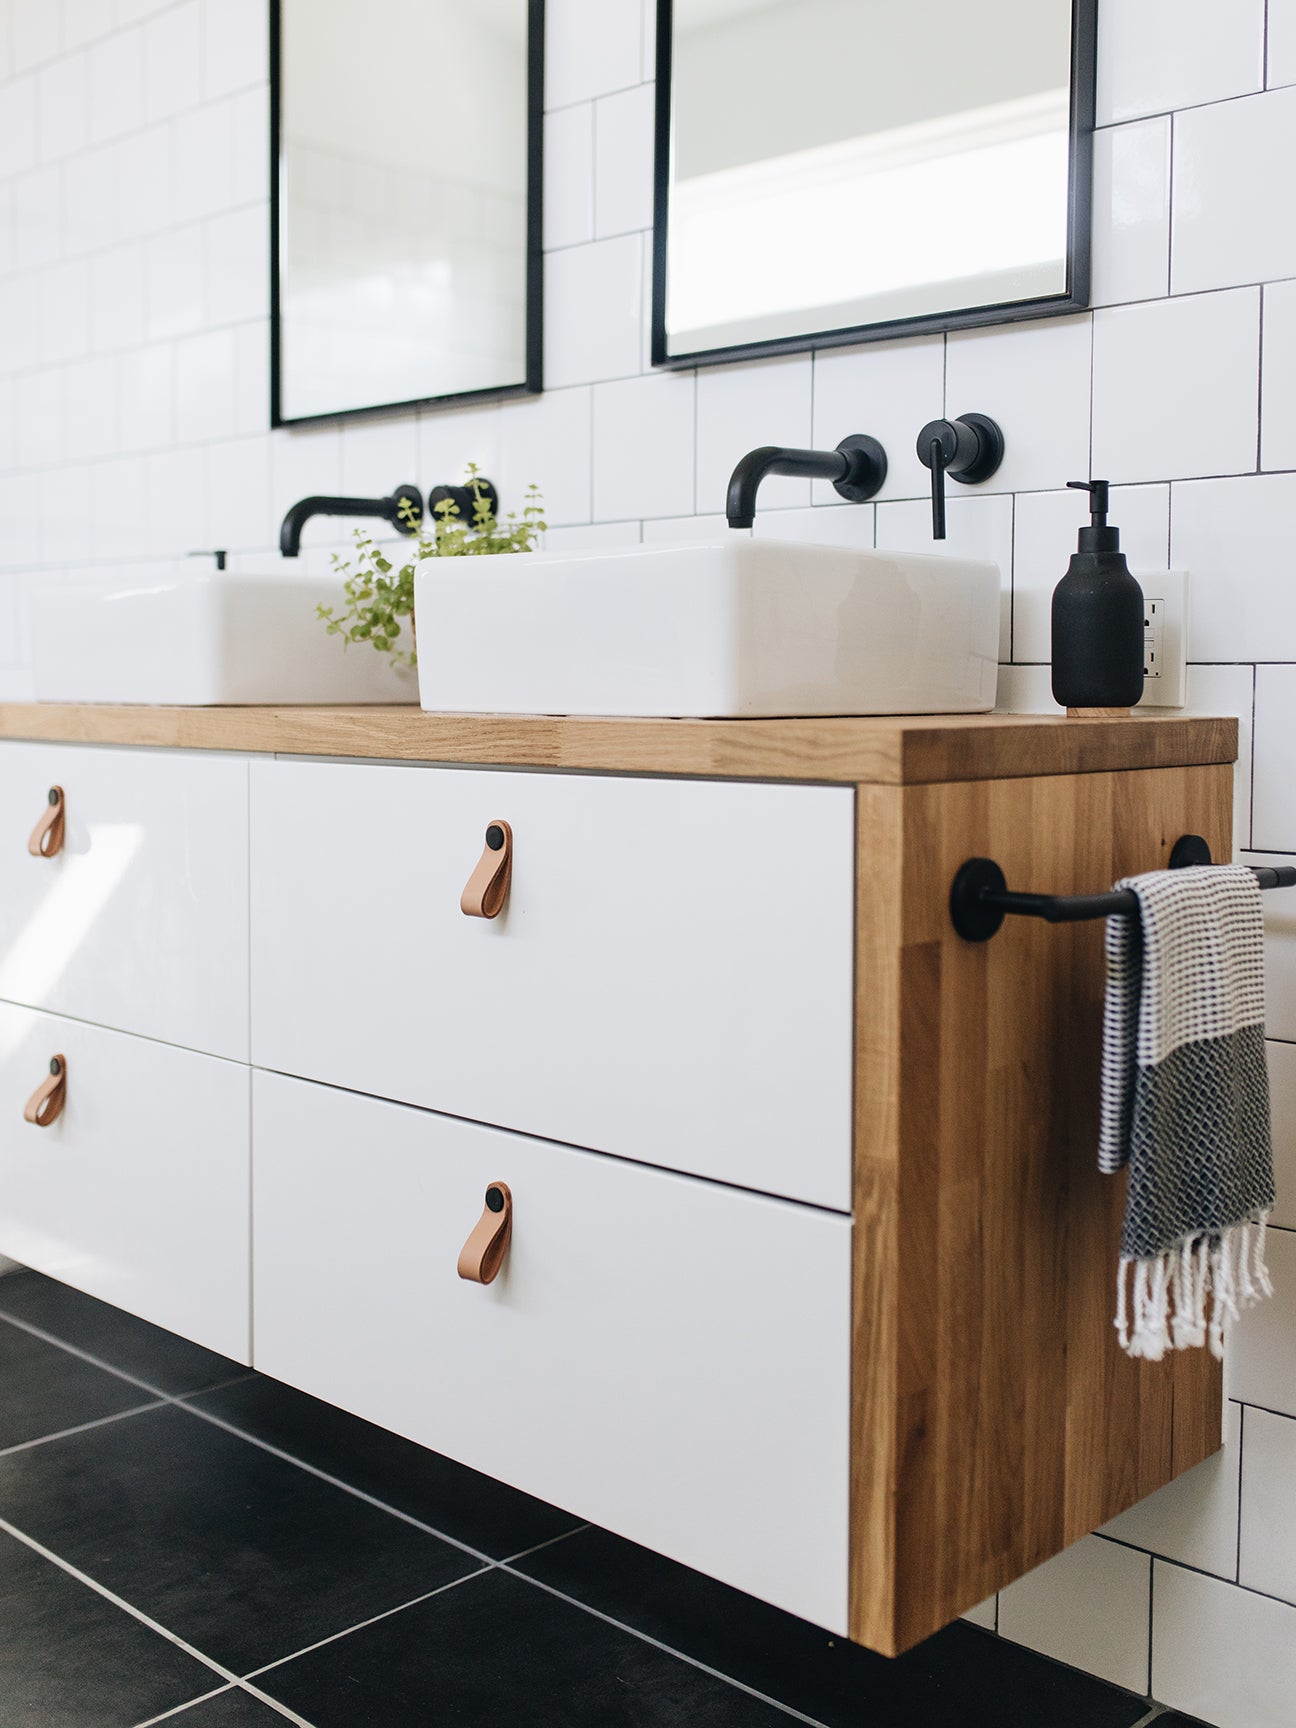 13 Ikea S That Were Made For Small, Slim Cabinet For Bathroom Ikea